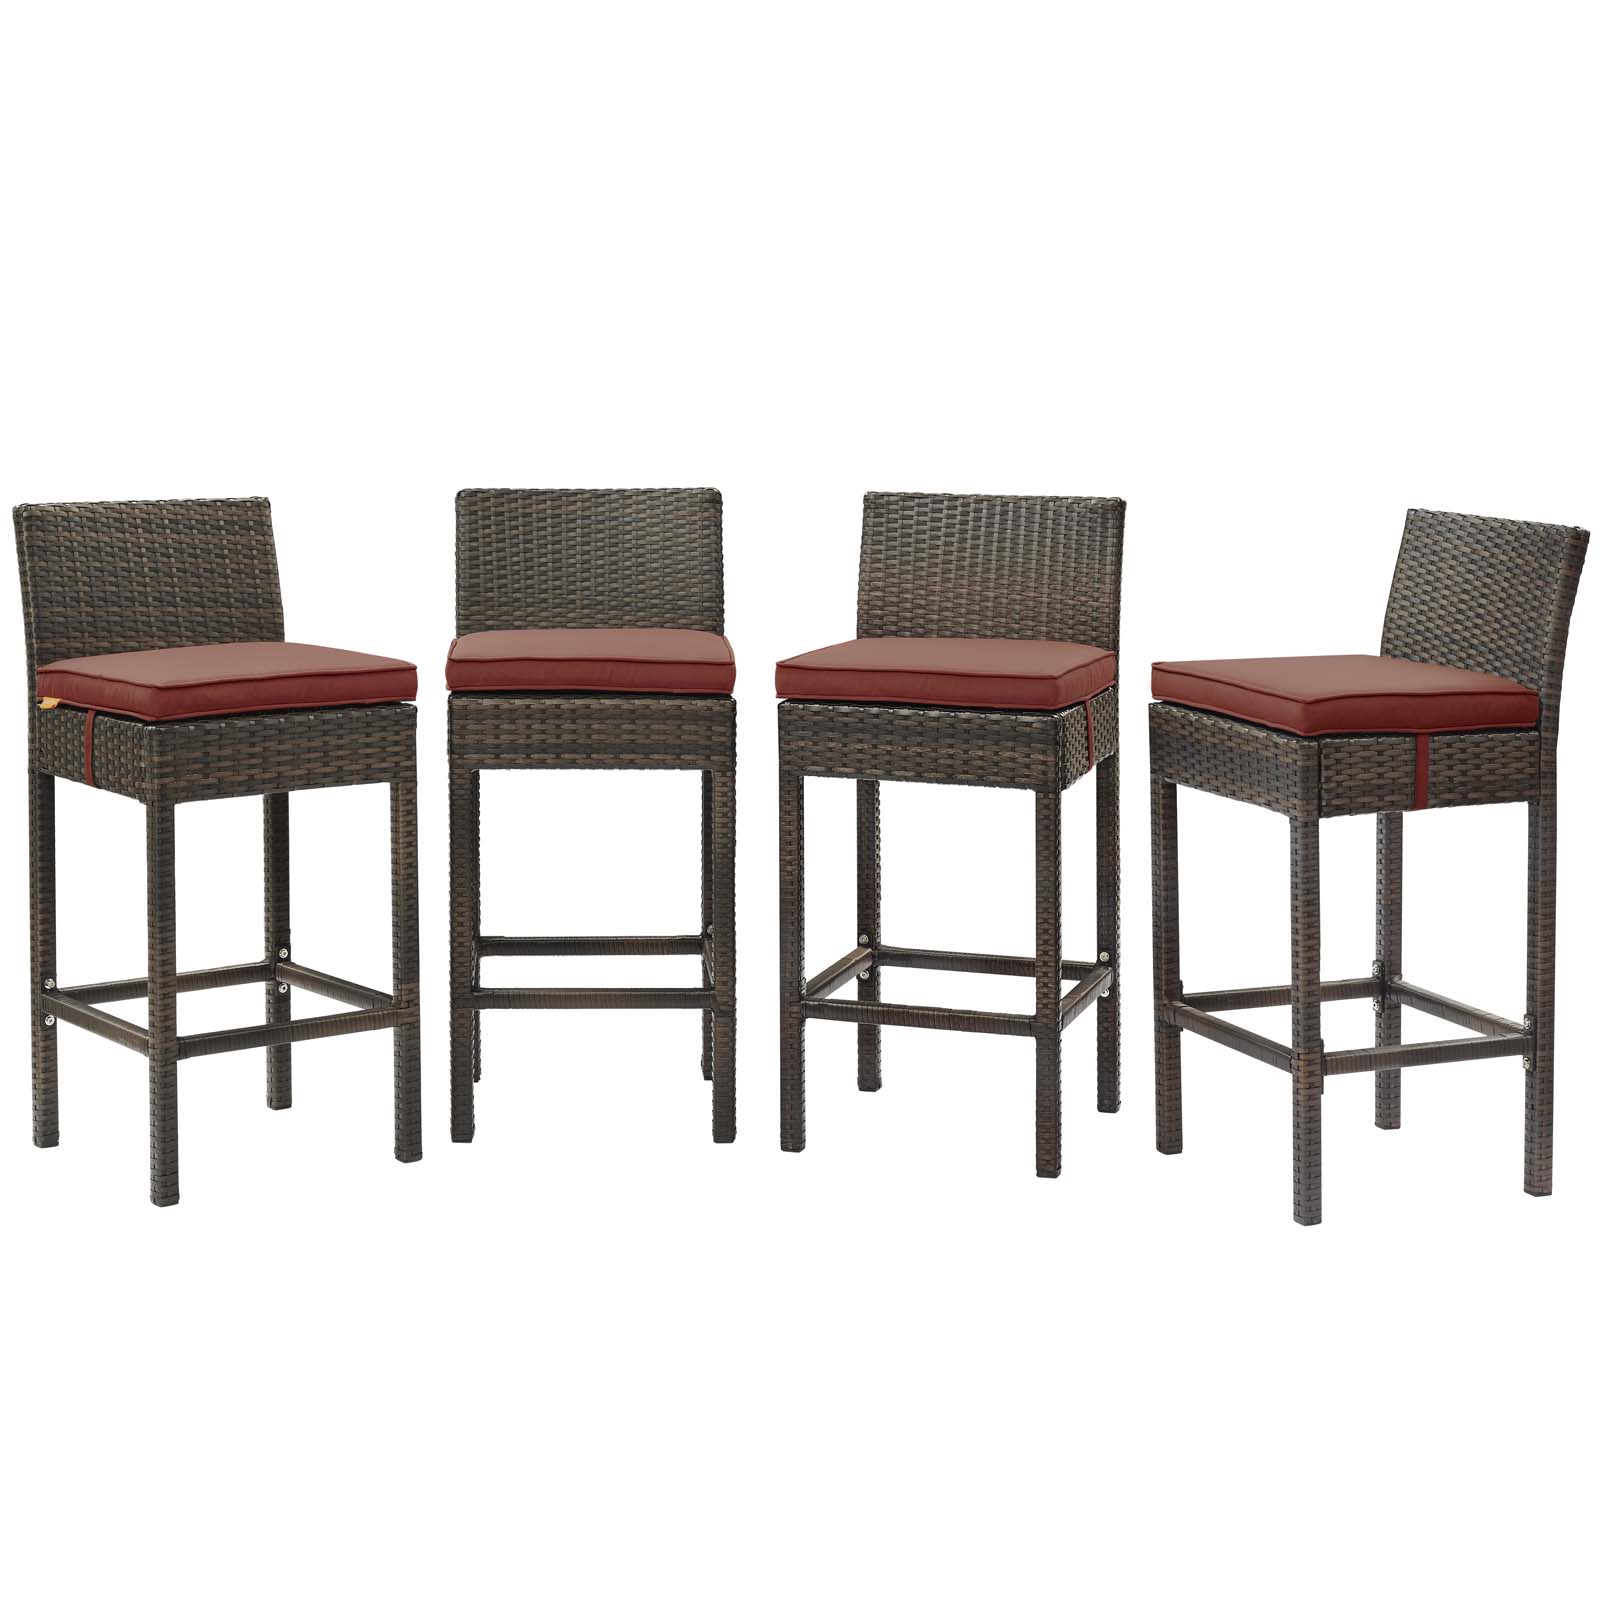 Contemporary Modern Urban Designer Outdoor Patio Balcony Garden Furniture Bar Side Stool Chair, Set of Four, Fabric Rattan Wicker, Brown Red - image 1 of 5